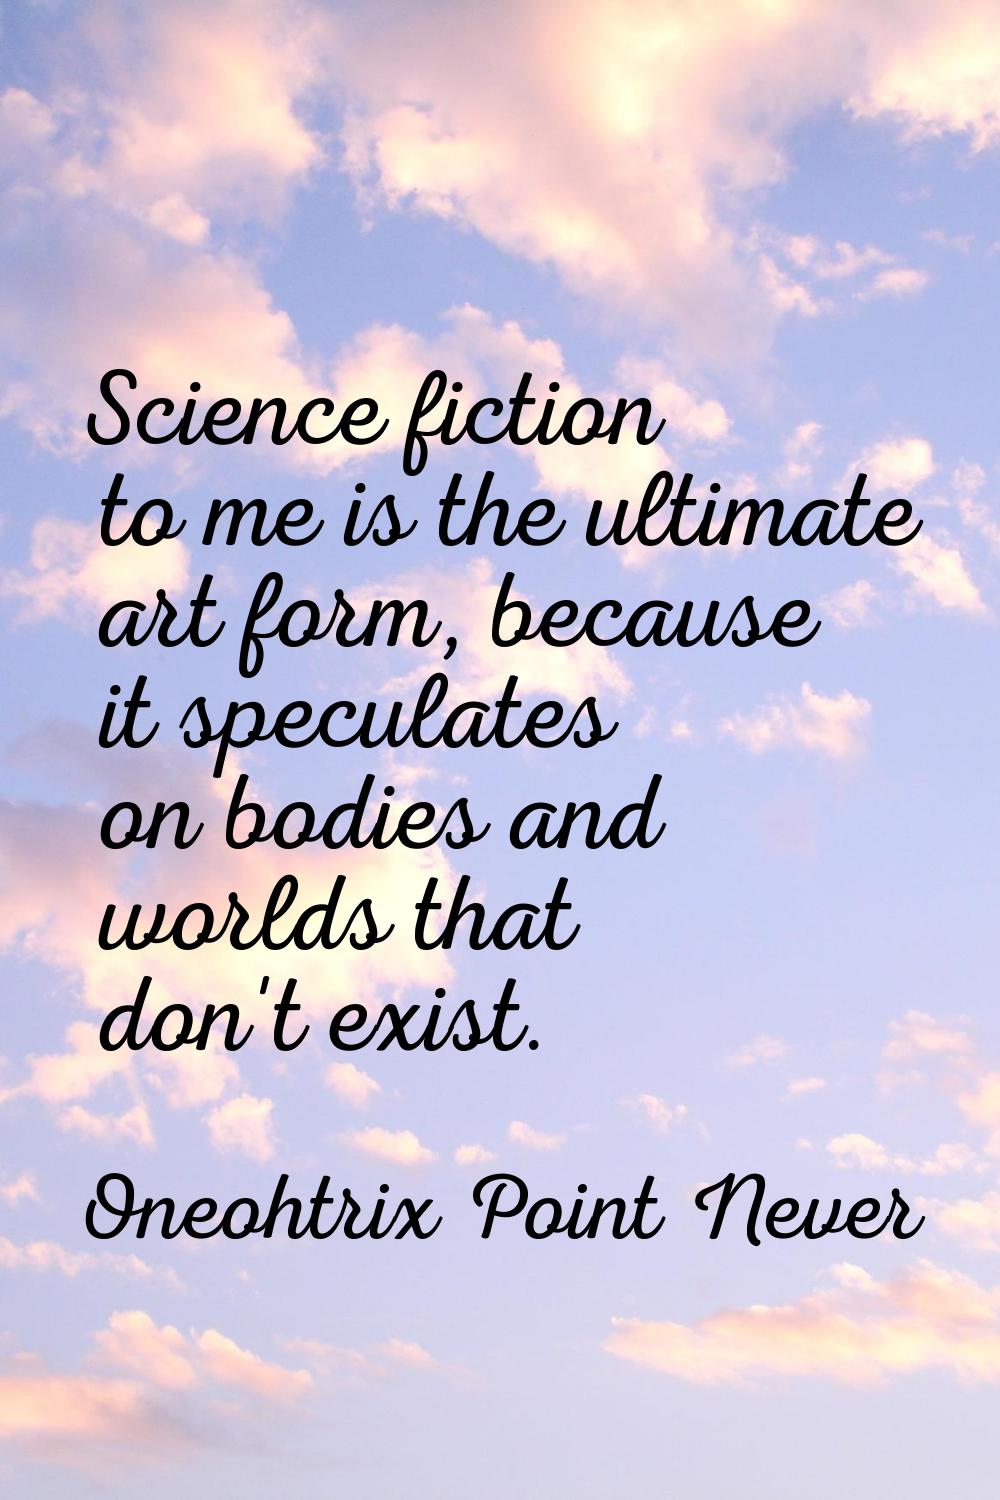 Science fiction to me is the ultimate art form, because it speculates on bodies and worlds that don